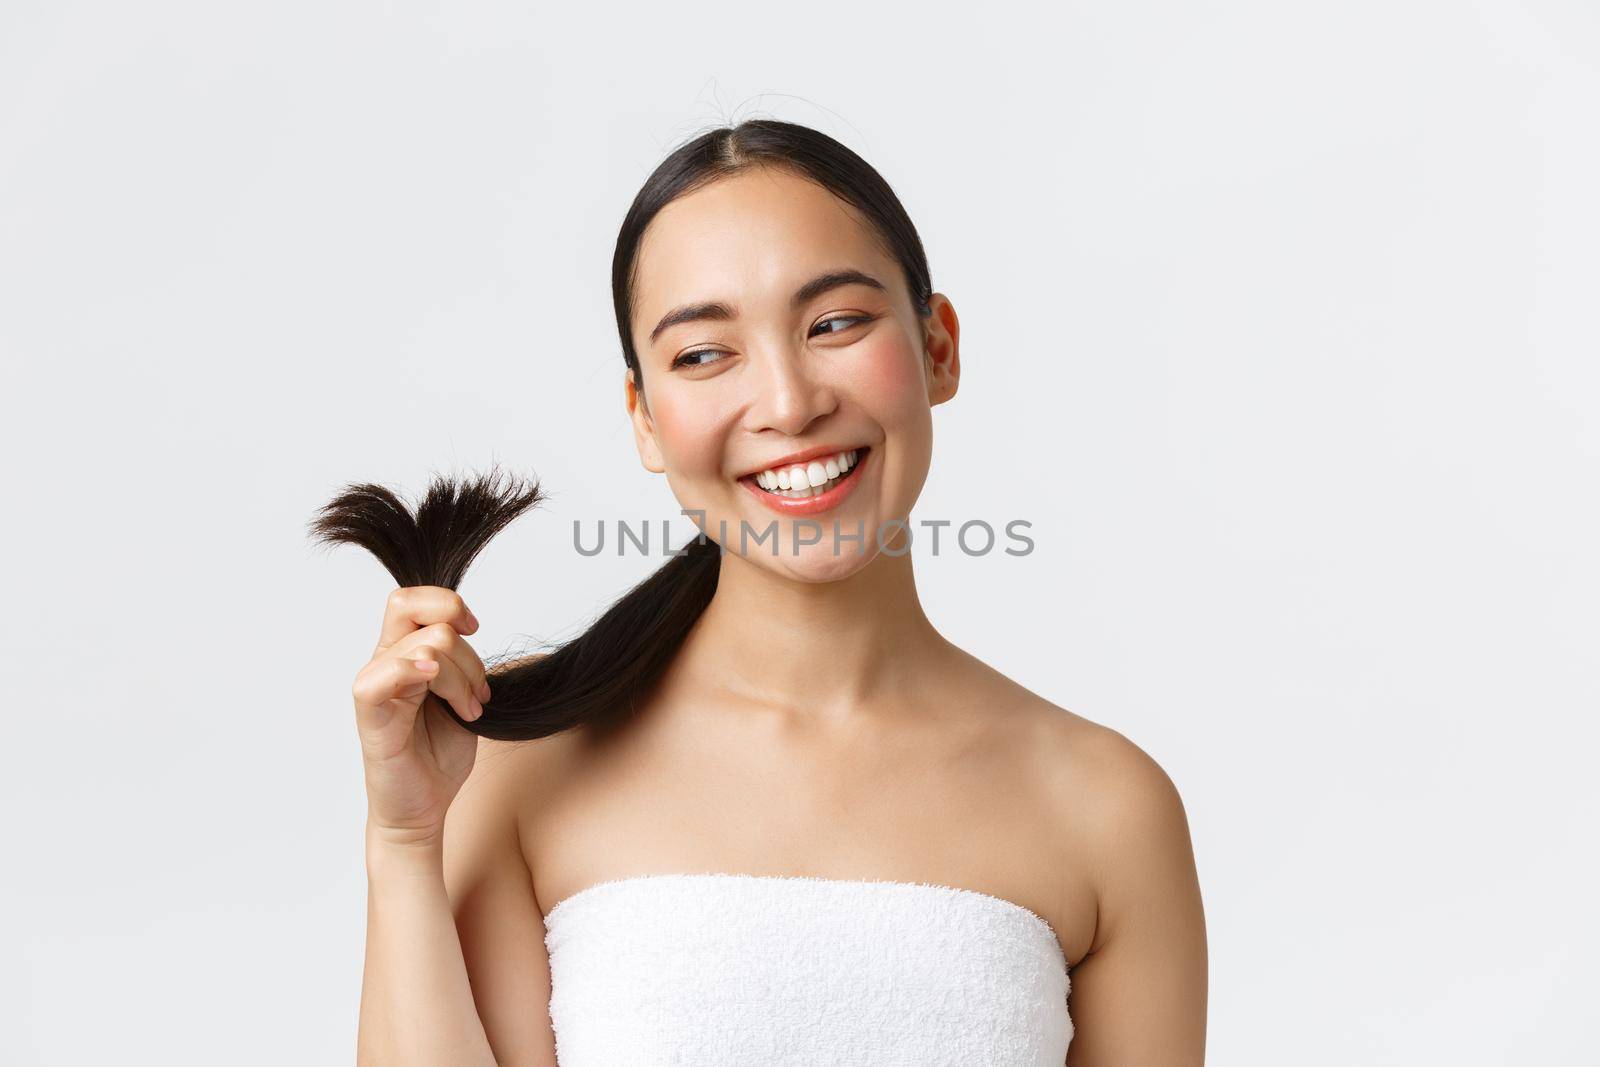 Beauty, hair loss products, shampoo and hair care concept. Gorgeous happy asian woman in bath towel showing hair ends and smiling satisfied, cured split ends and looking satisfied.